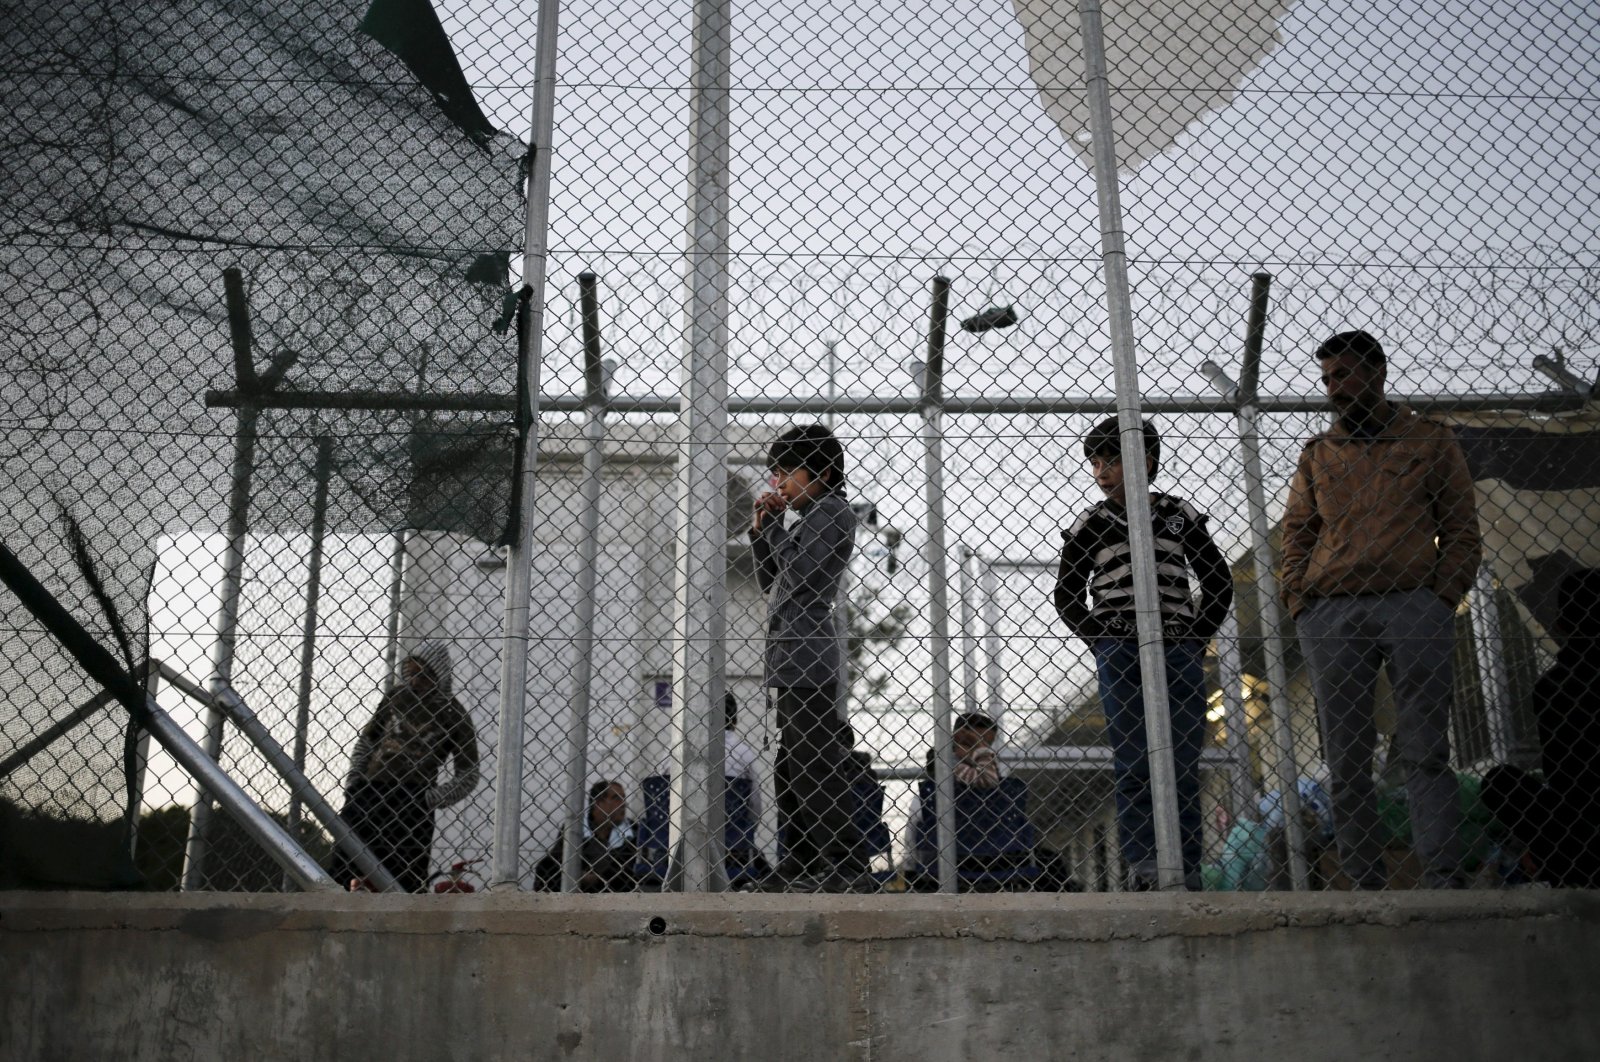 A migrant child stands next to a metal fence at the Moria refugee camp on the Greek island of Lesbos, Nov/ 5, 2015. (Reuters Photo)